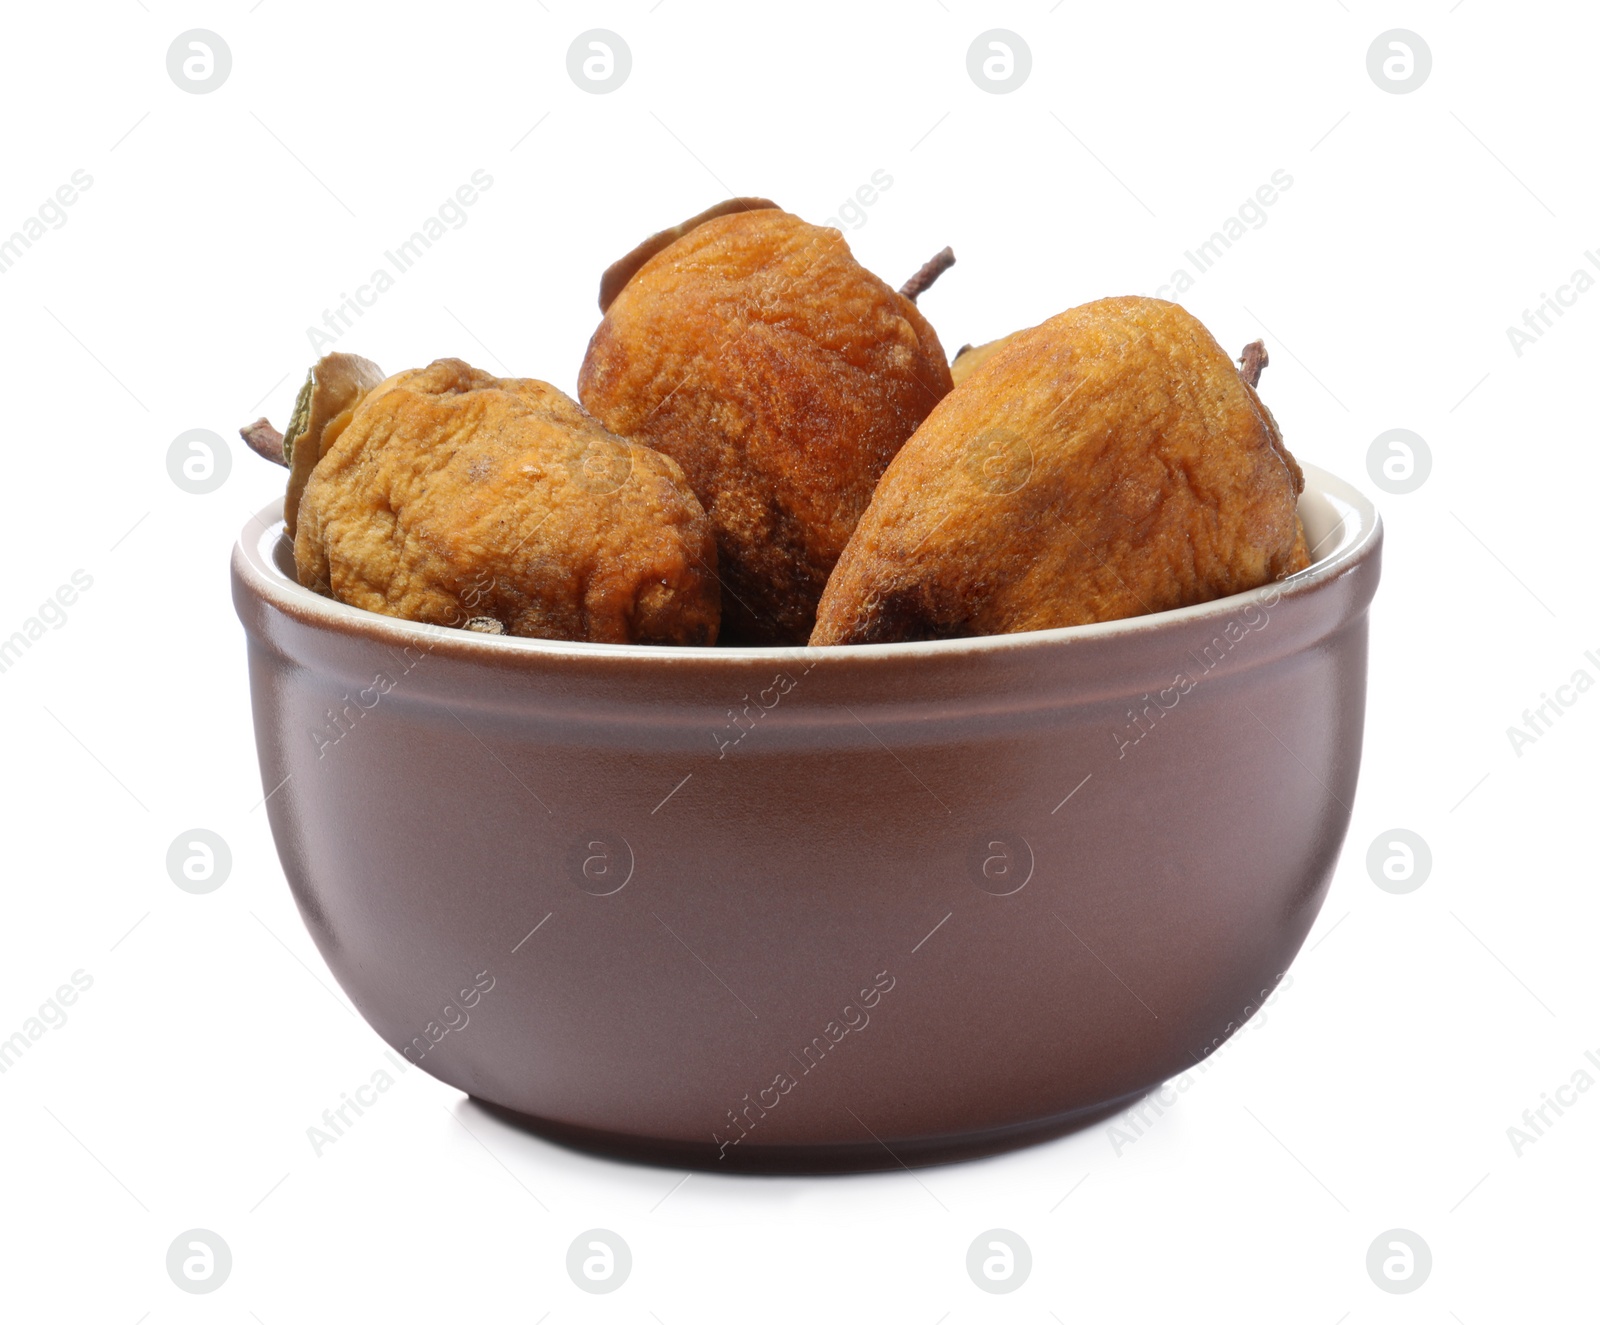 Photo of Tasty dried persimmon fruits in bowl on white background